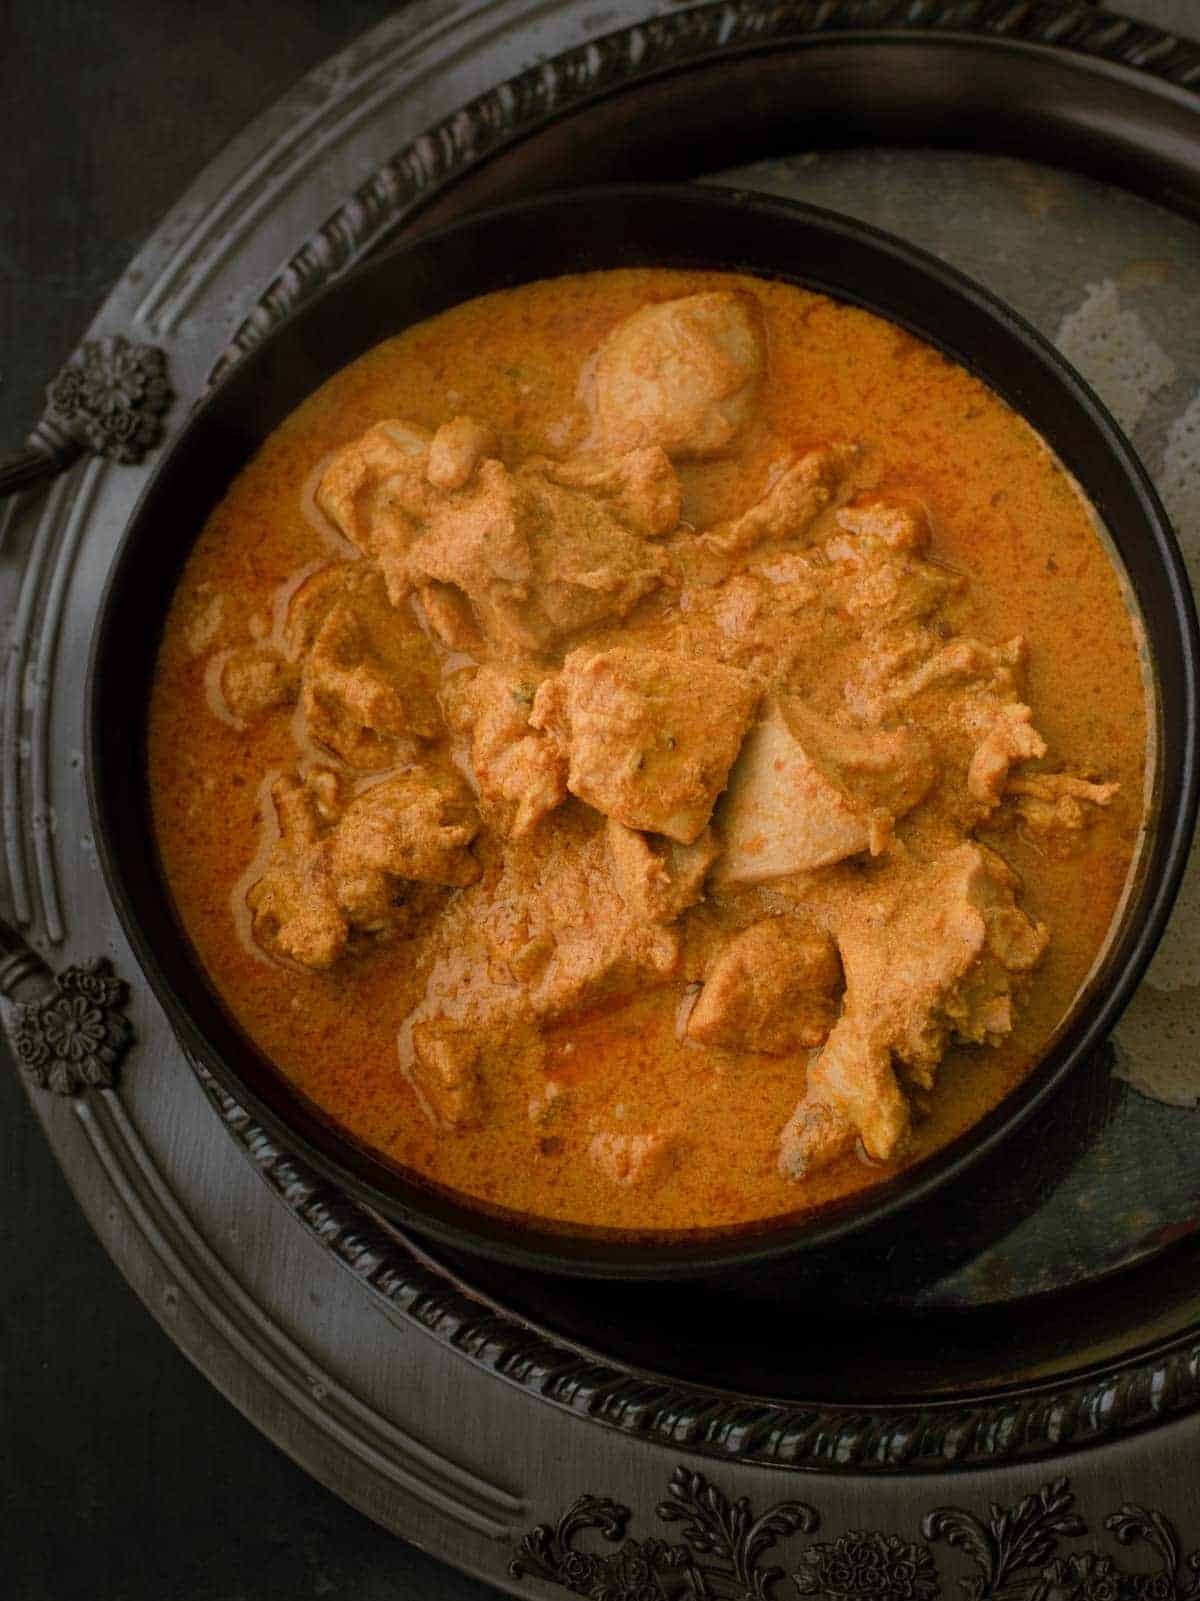 Mangalorean chicken curry or Kori Gassi is served in a black bowl with crispy rice wafers on the side.